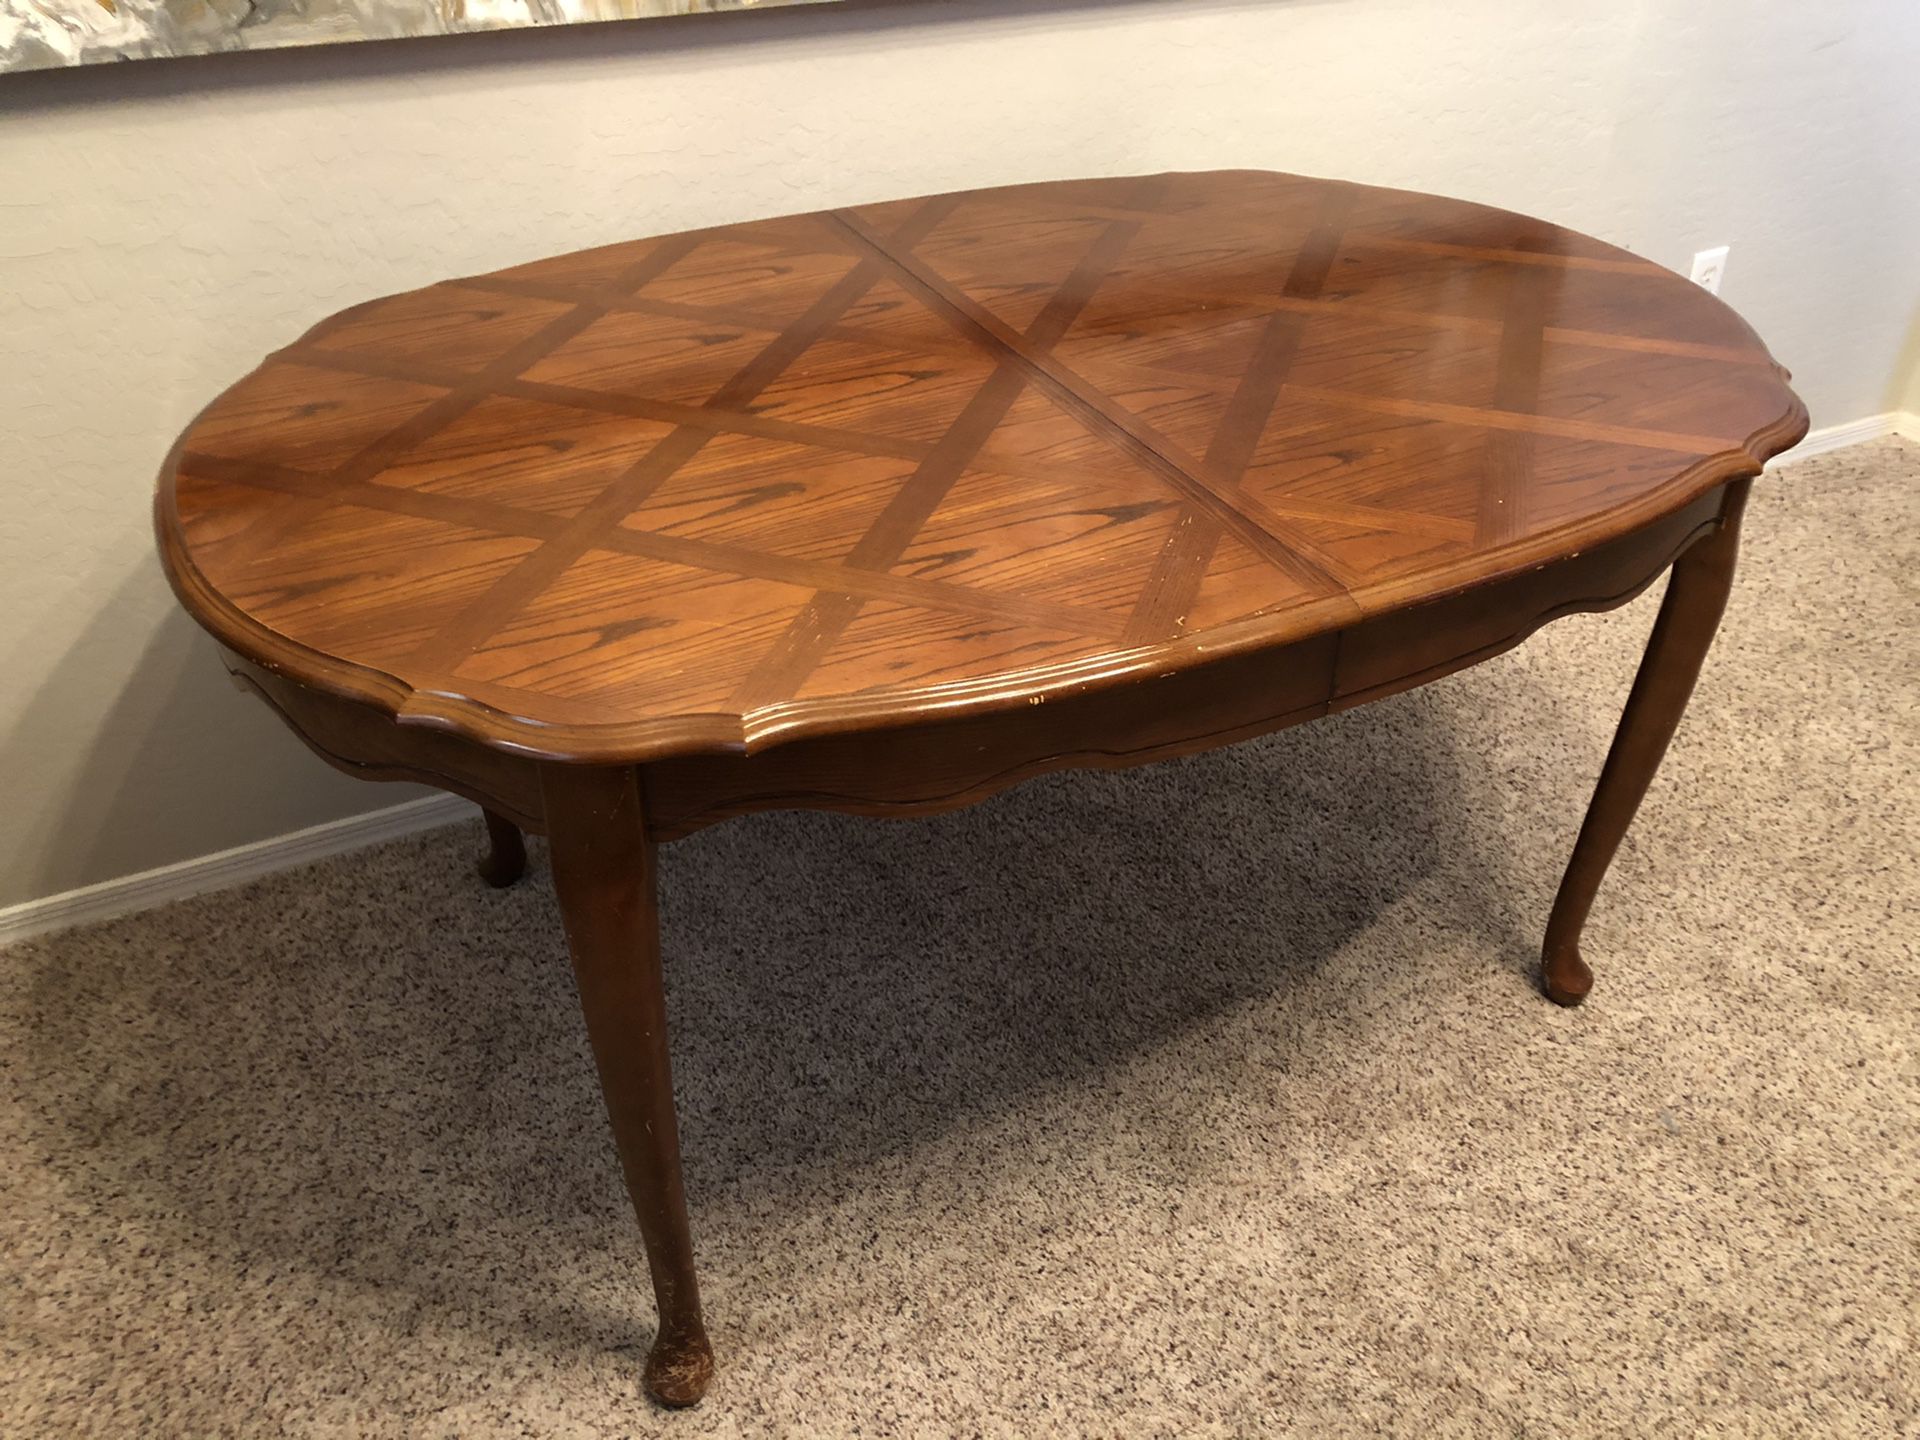 Gorgeous solid wood Oval kitchen Table Oval Desk